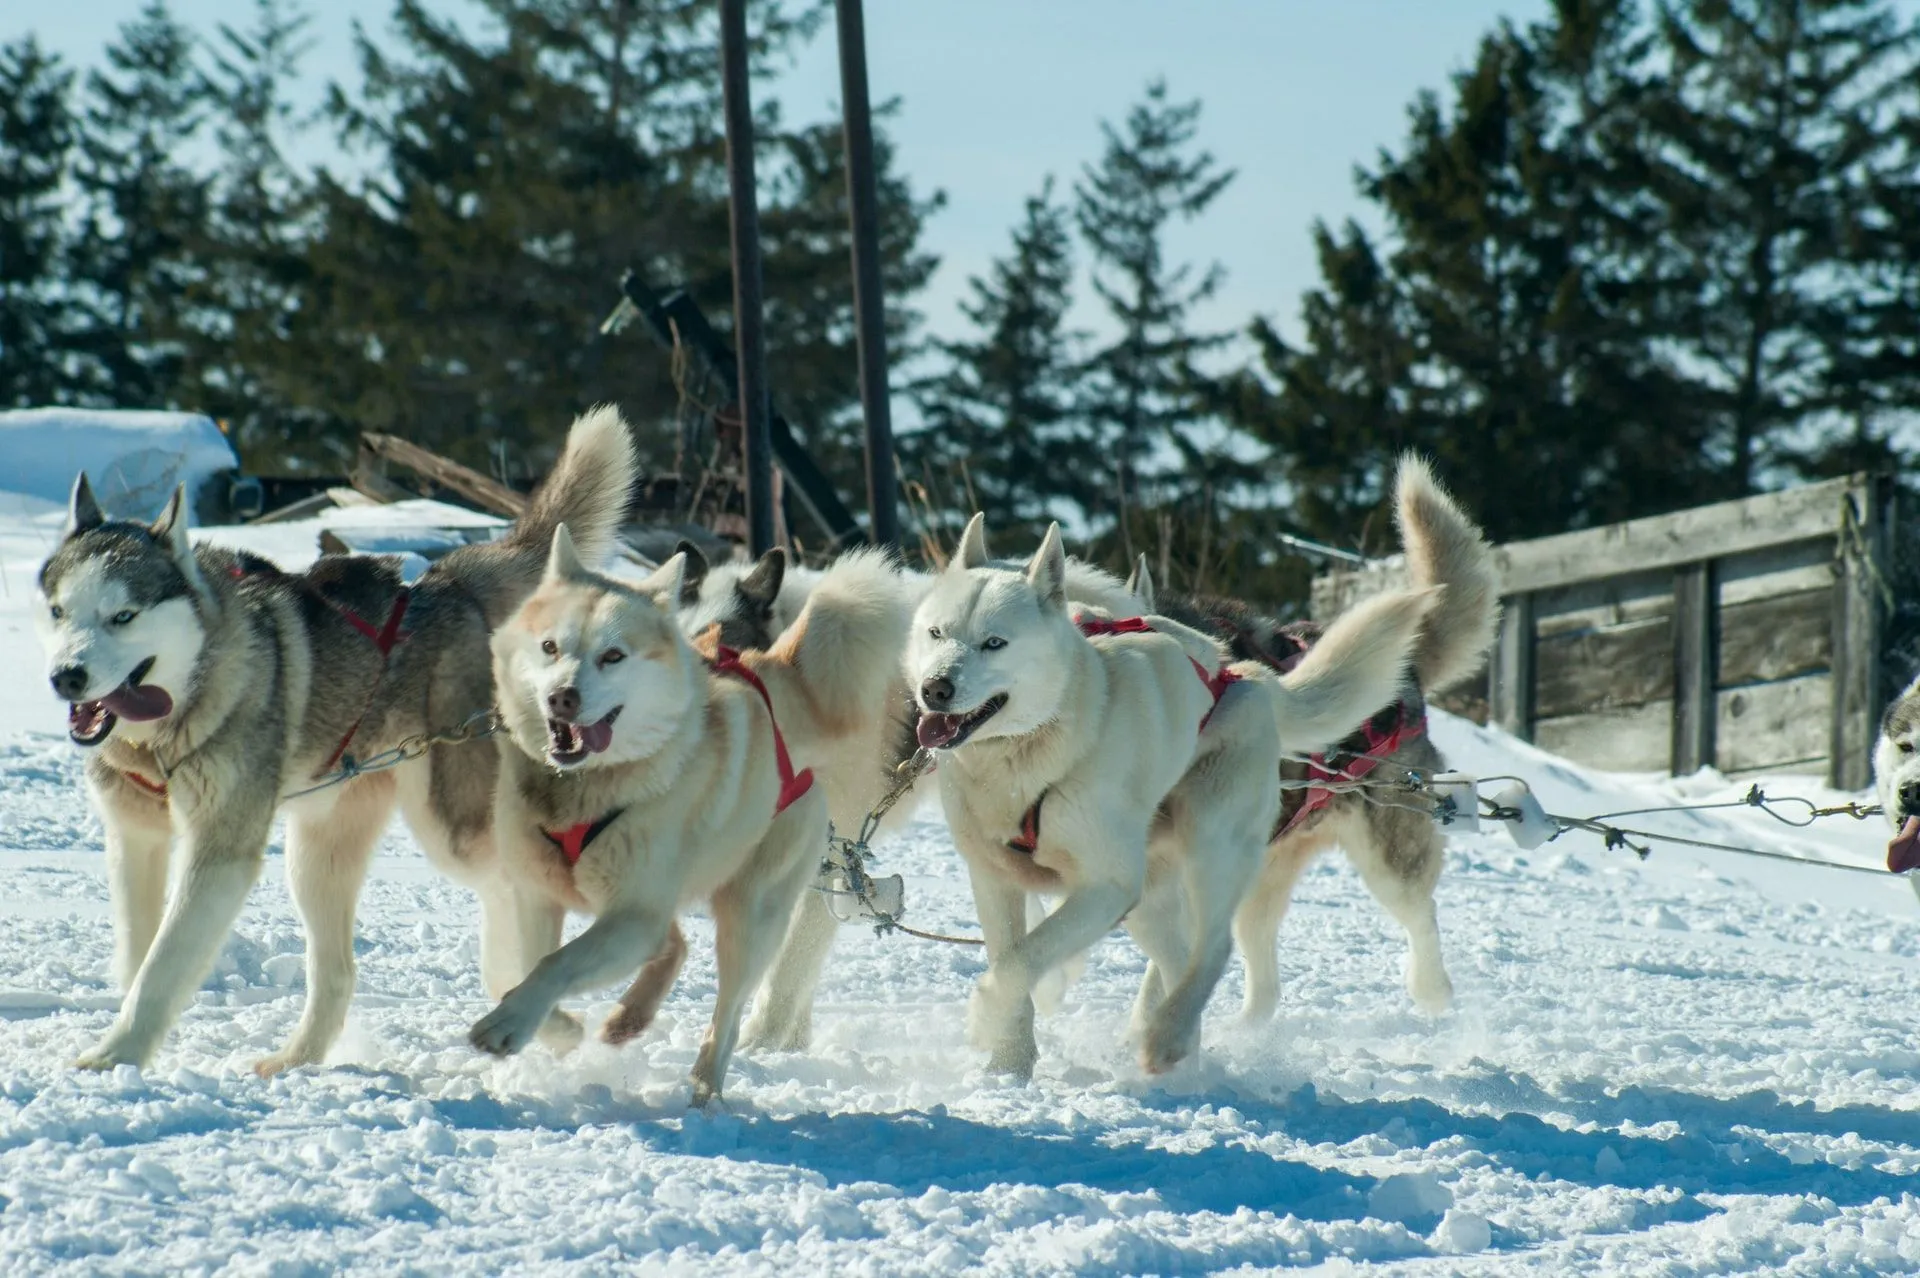 Sled dogs have been known to be very useful in areas with snow.